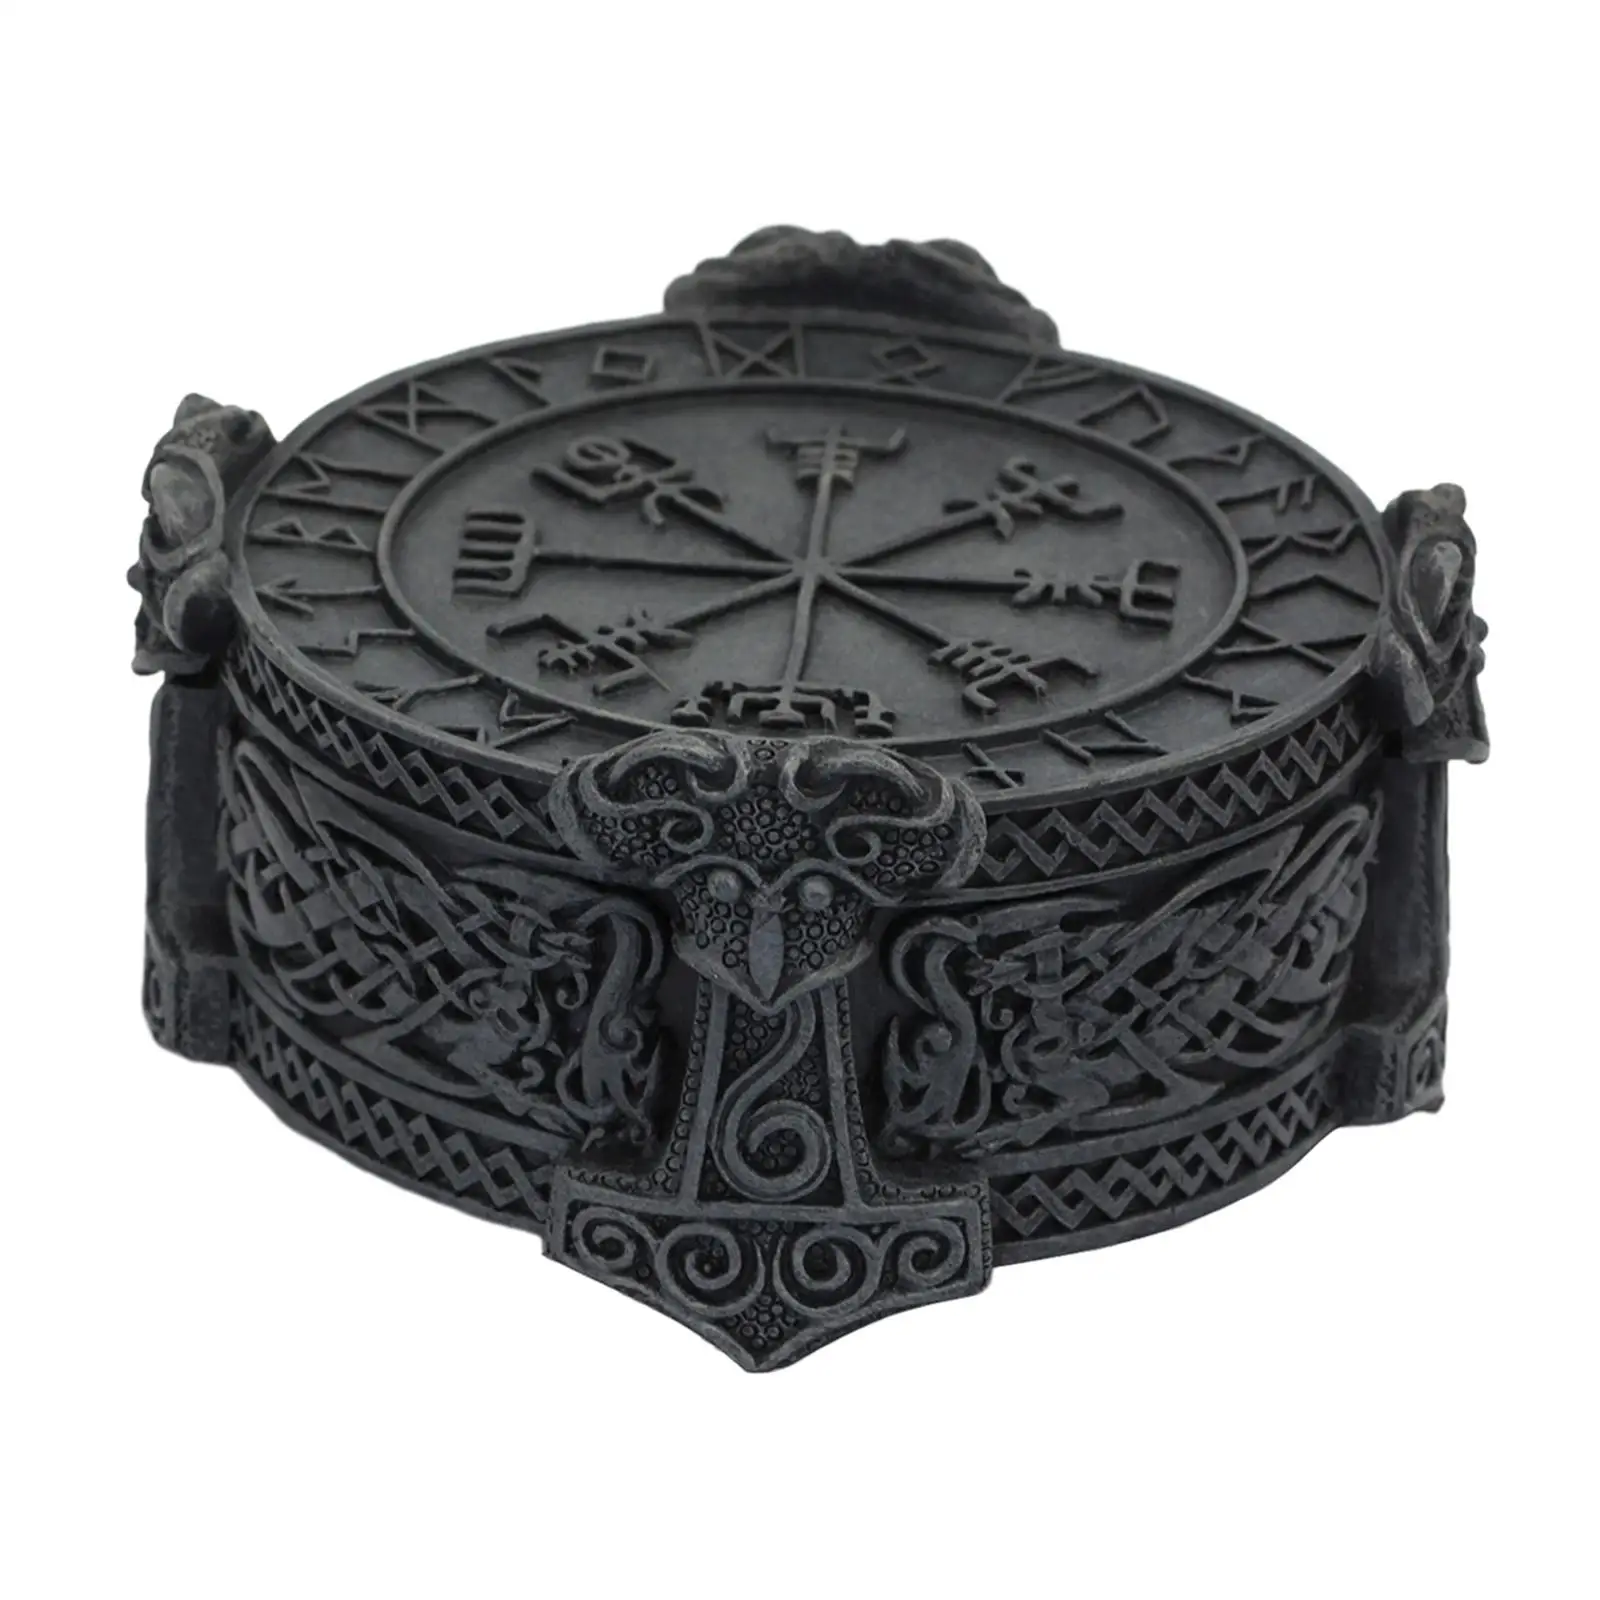 Trinket Jewelry Box Tabletop Ornaments Display Holder Viking for Home Decor Centerpiece Birthday Gift Collectible Necklaces